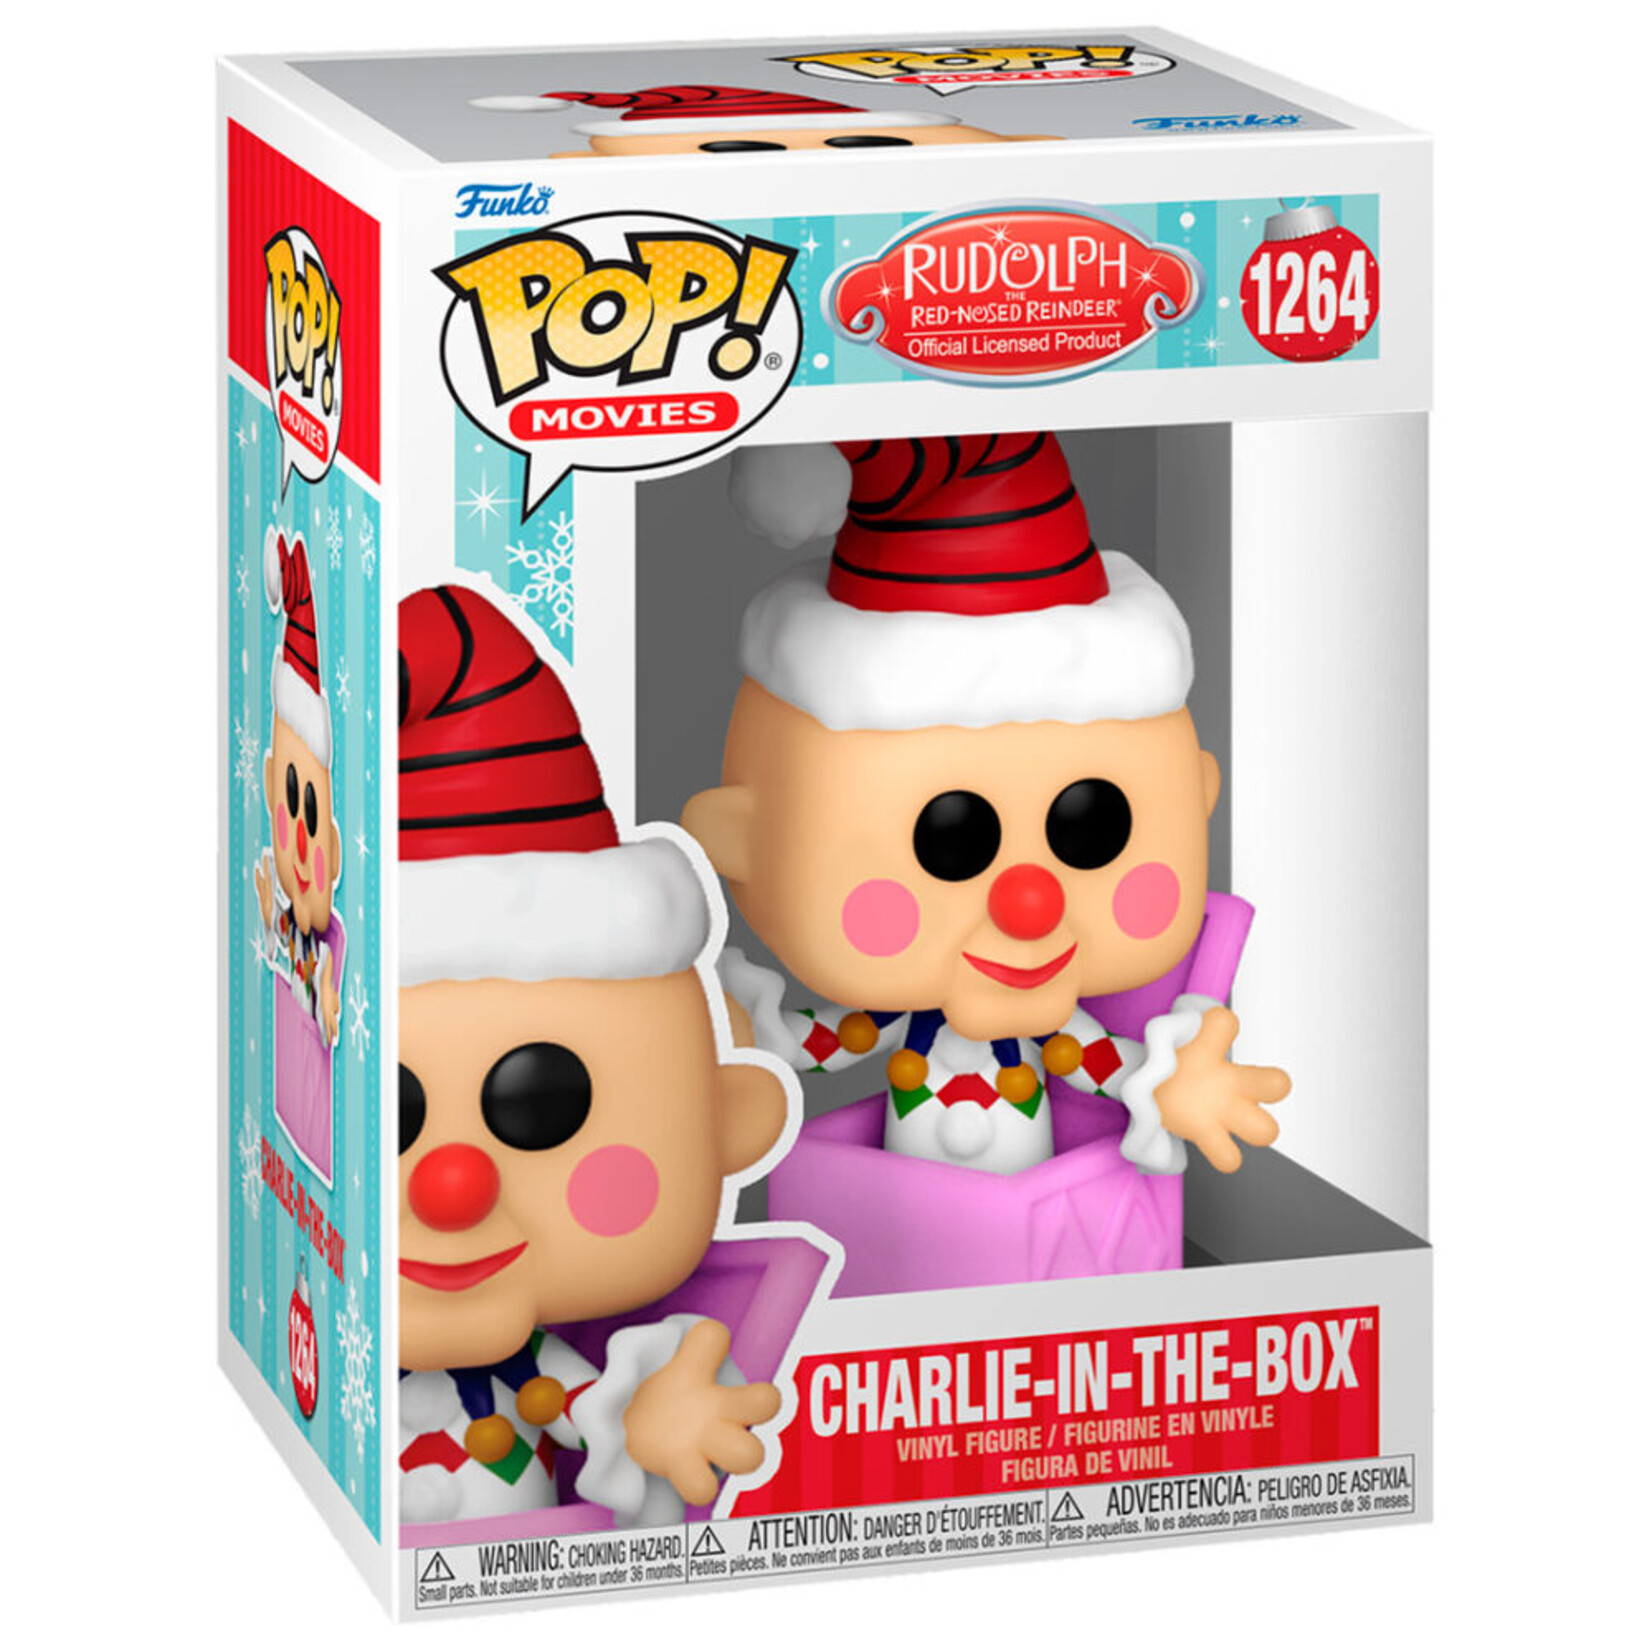 Funko Funko Rudolph the Red-Nosed Reindeer POP! Movies Vinyl Figure Charlie-in-the-Box 9 cm